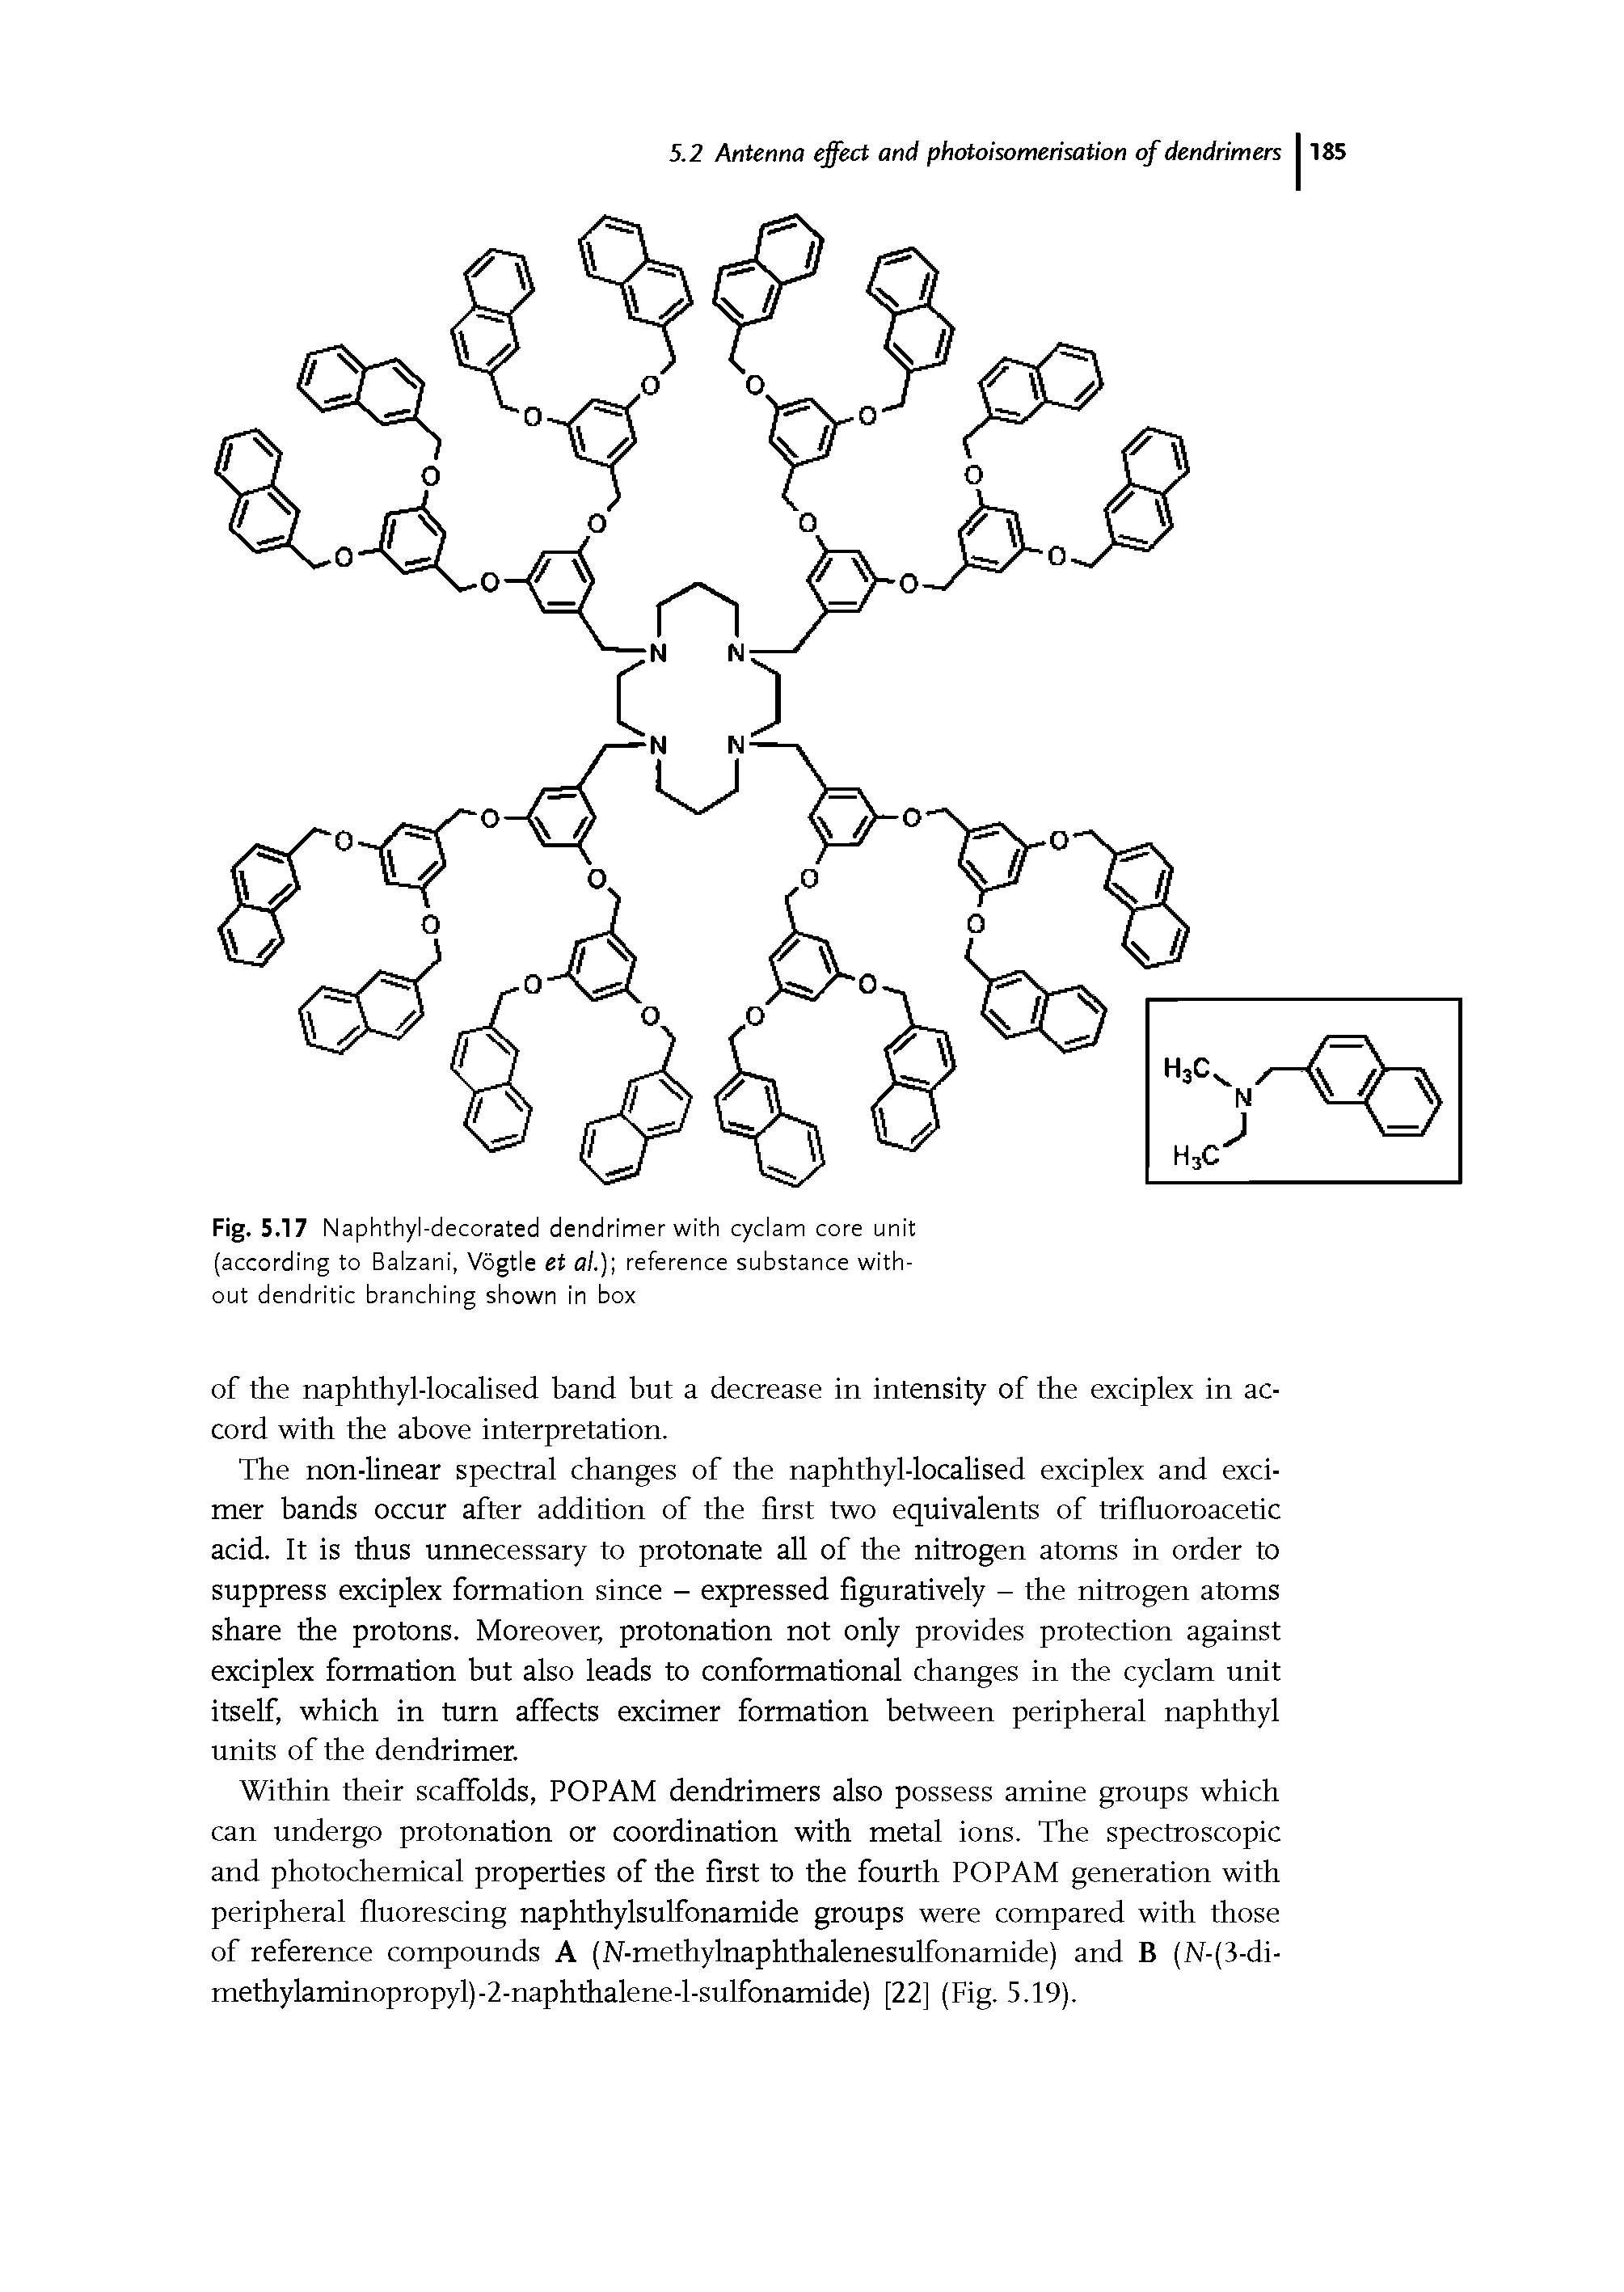 Fig. 5.17 Naphthyl-decorated dendrimer with cyclam core unit (according to Balzani, Vogtle et Cl/.) reference substance without dendritic branching shown in box...